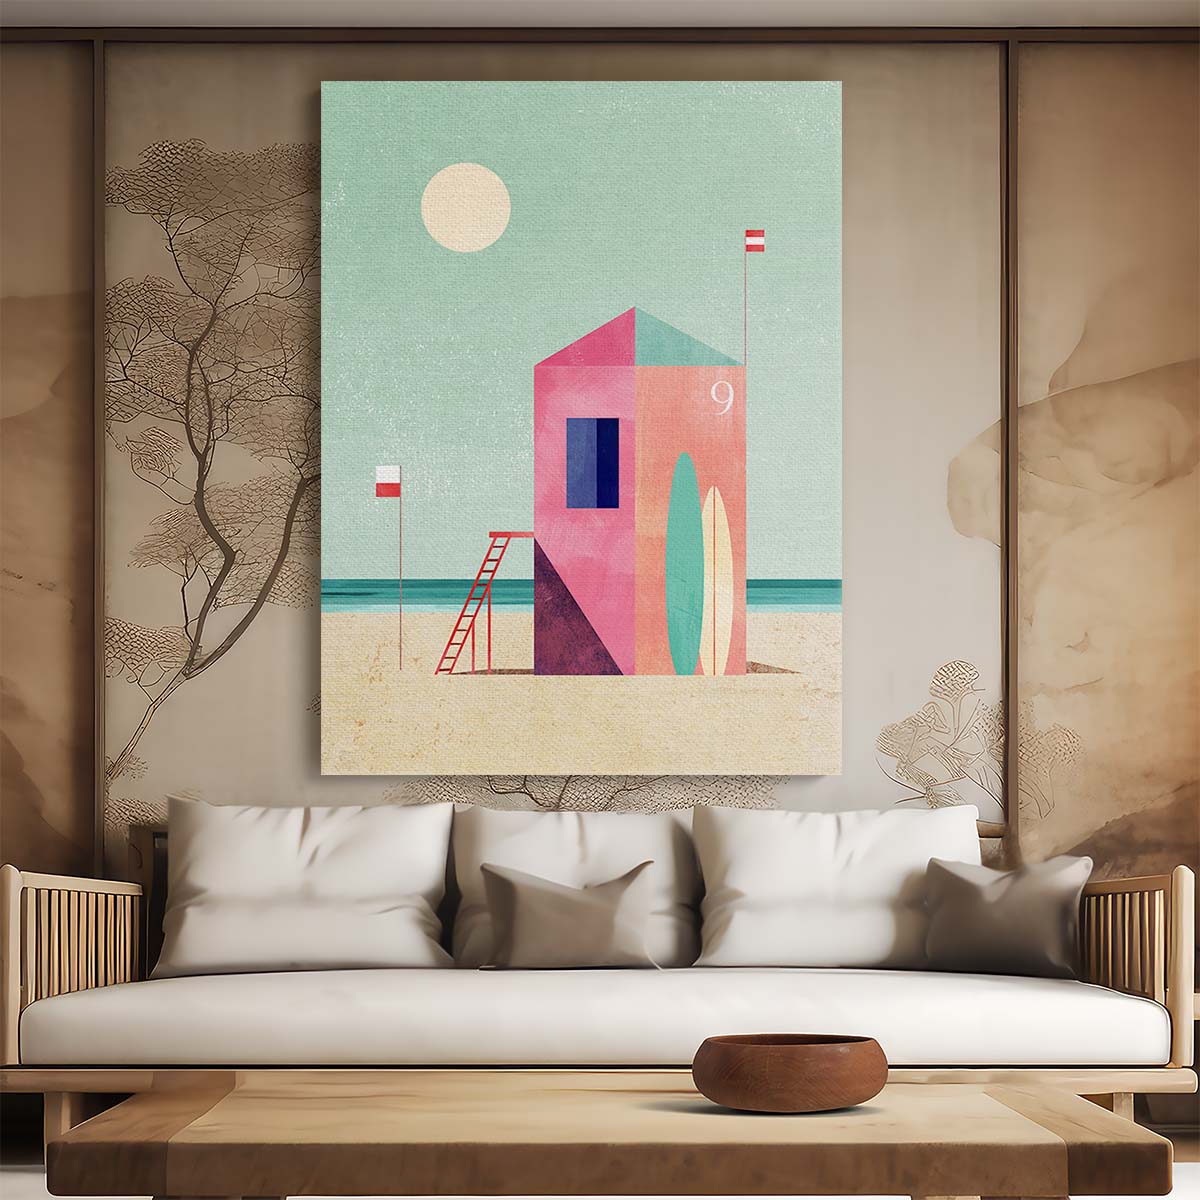 Colorful Miami Beach Surf Hut Illustration Wall Art by Luxuriance Designs, made in USA